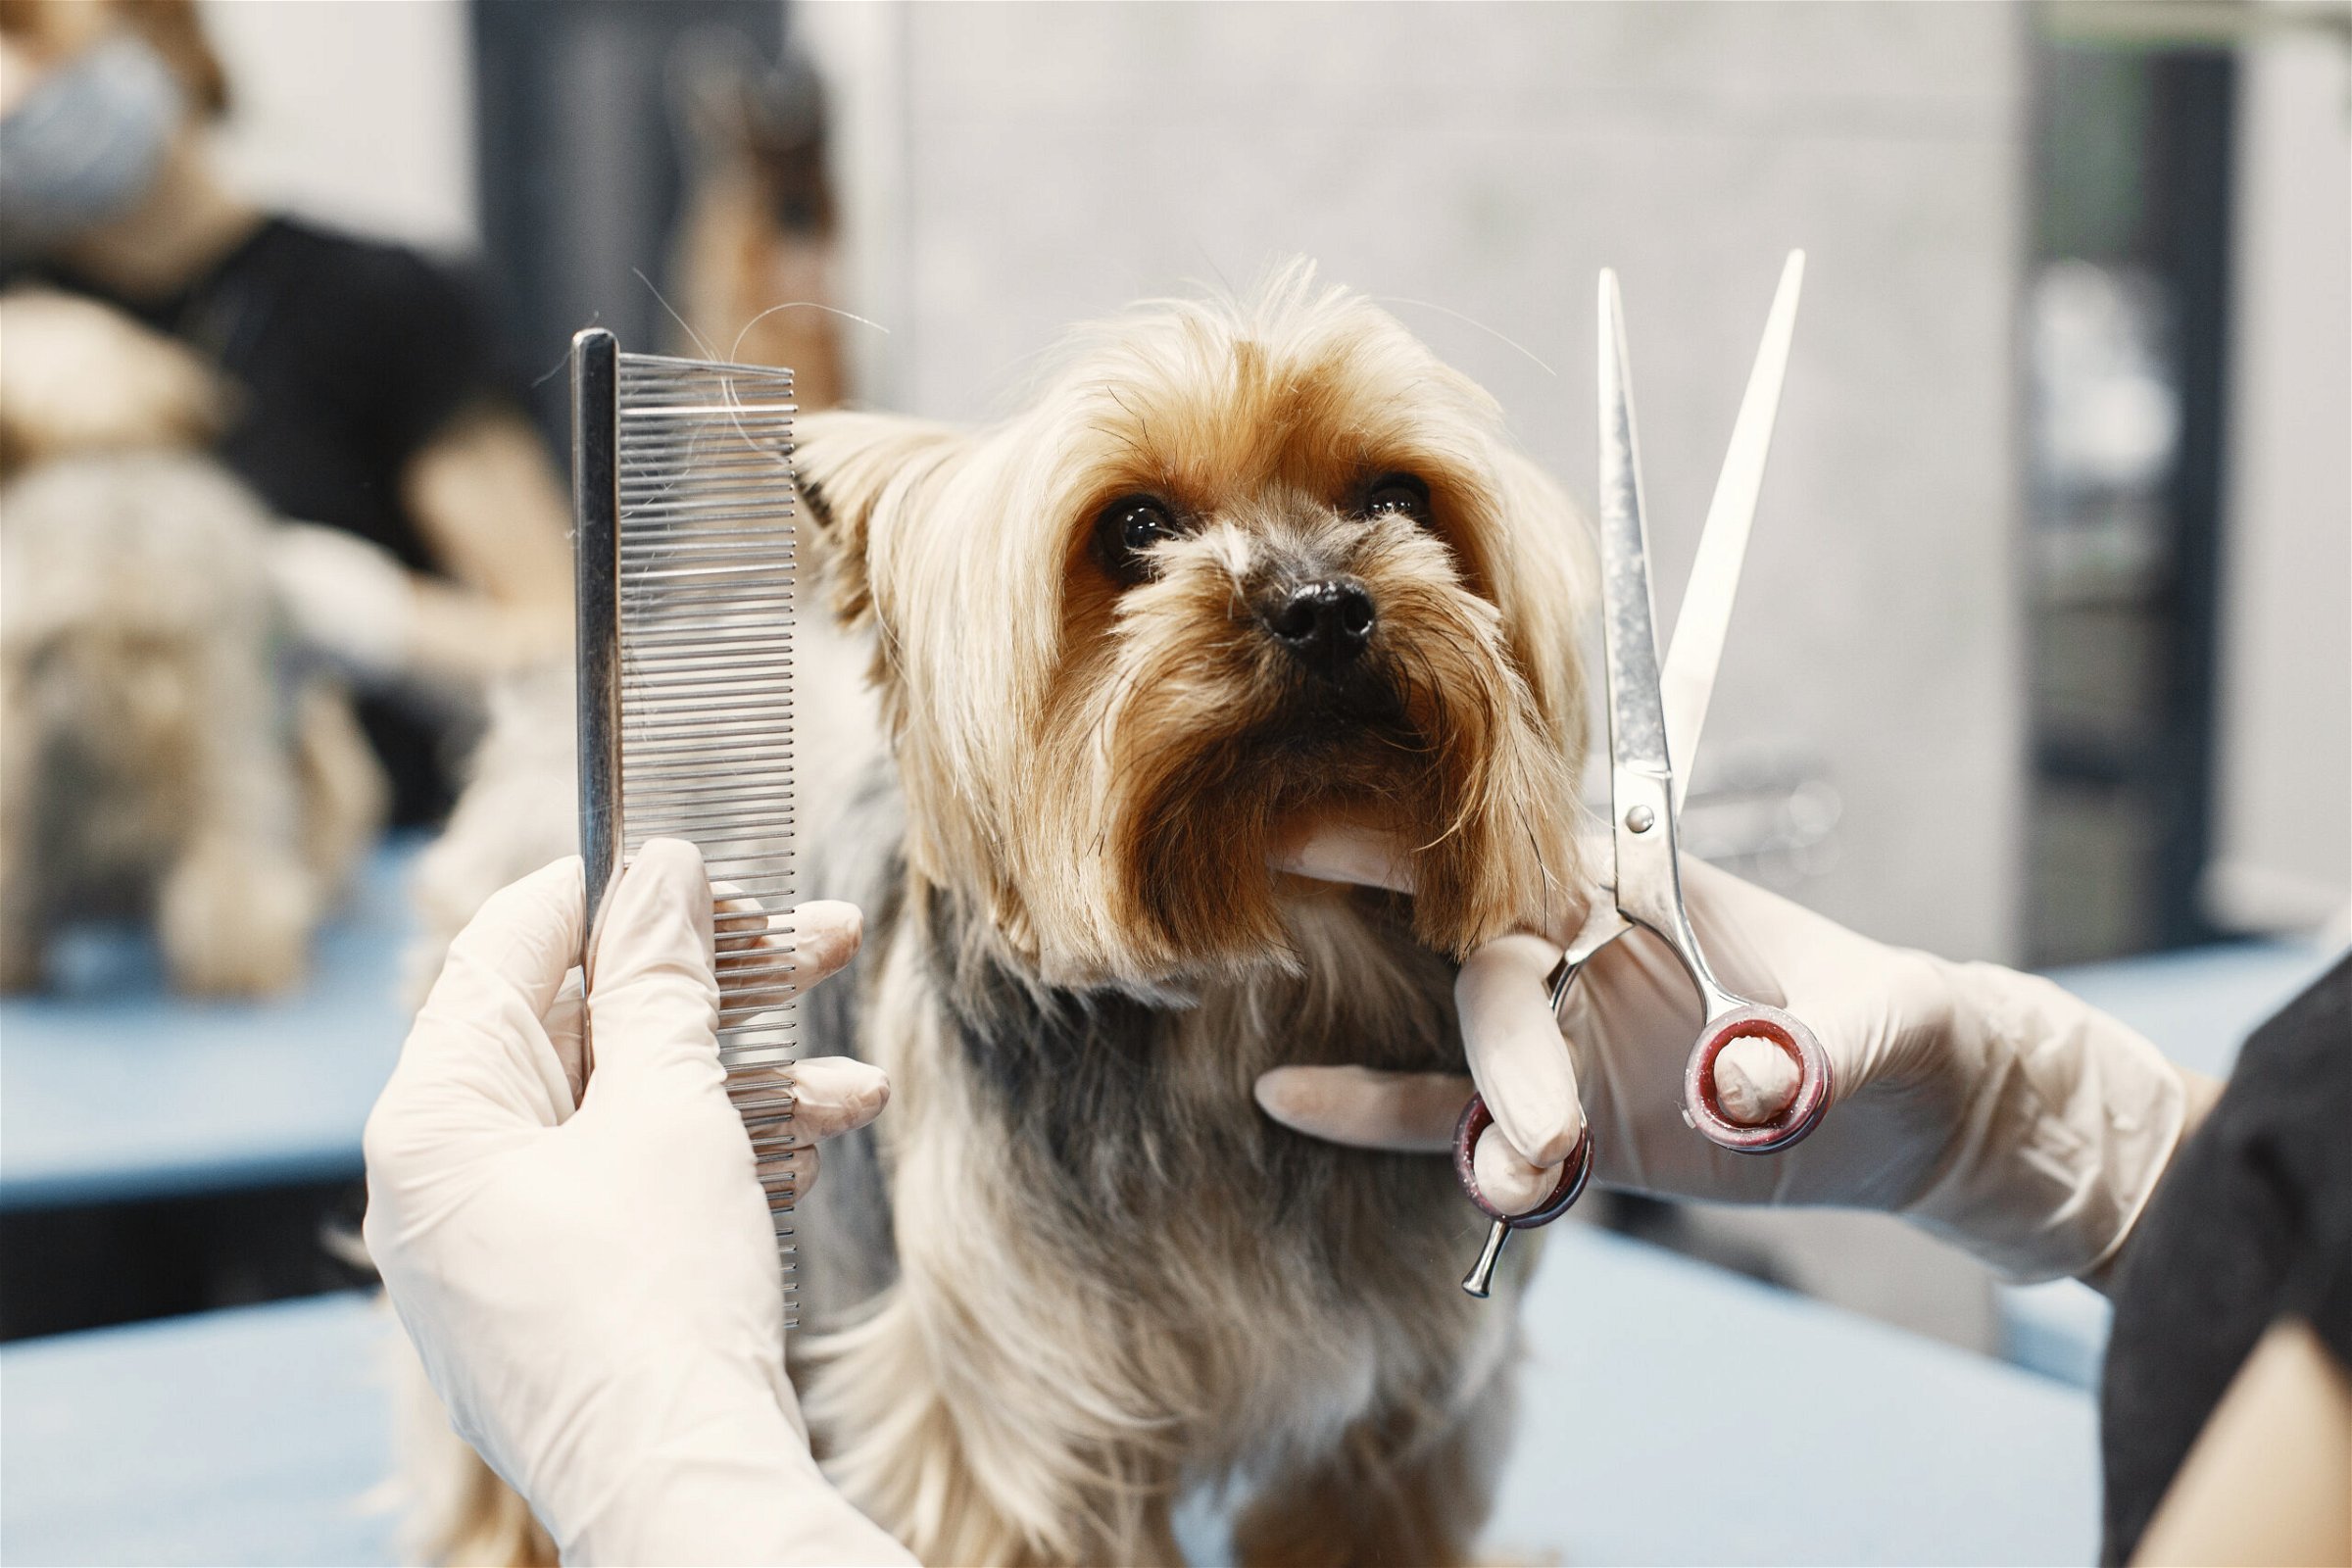 A Yorkshire terrier getting groomed with scissors and a comb at the Burlingame Pet Salon.